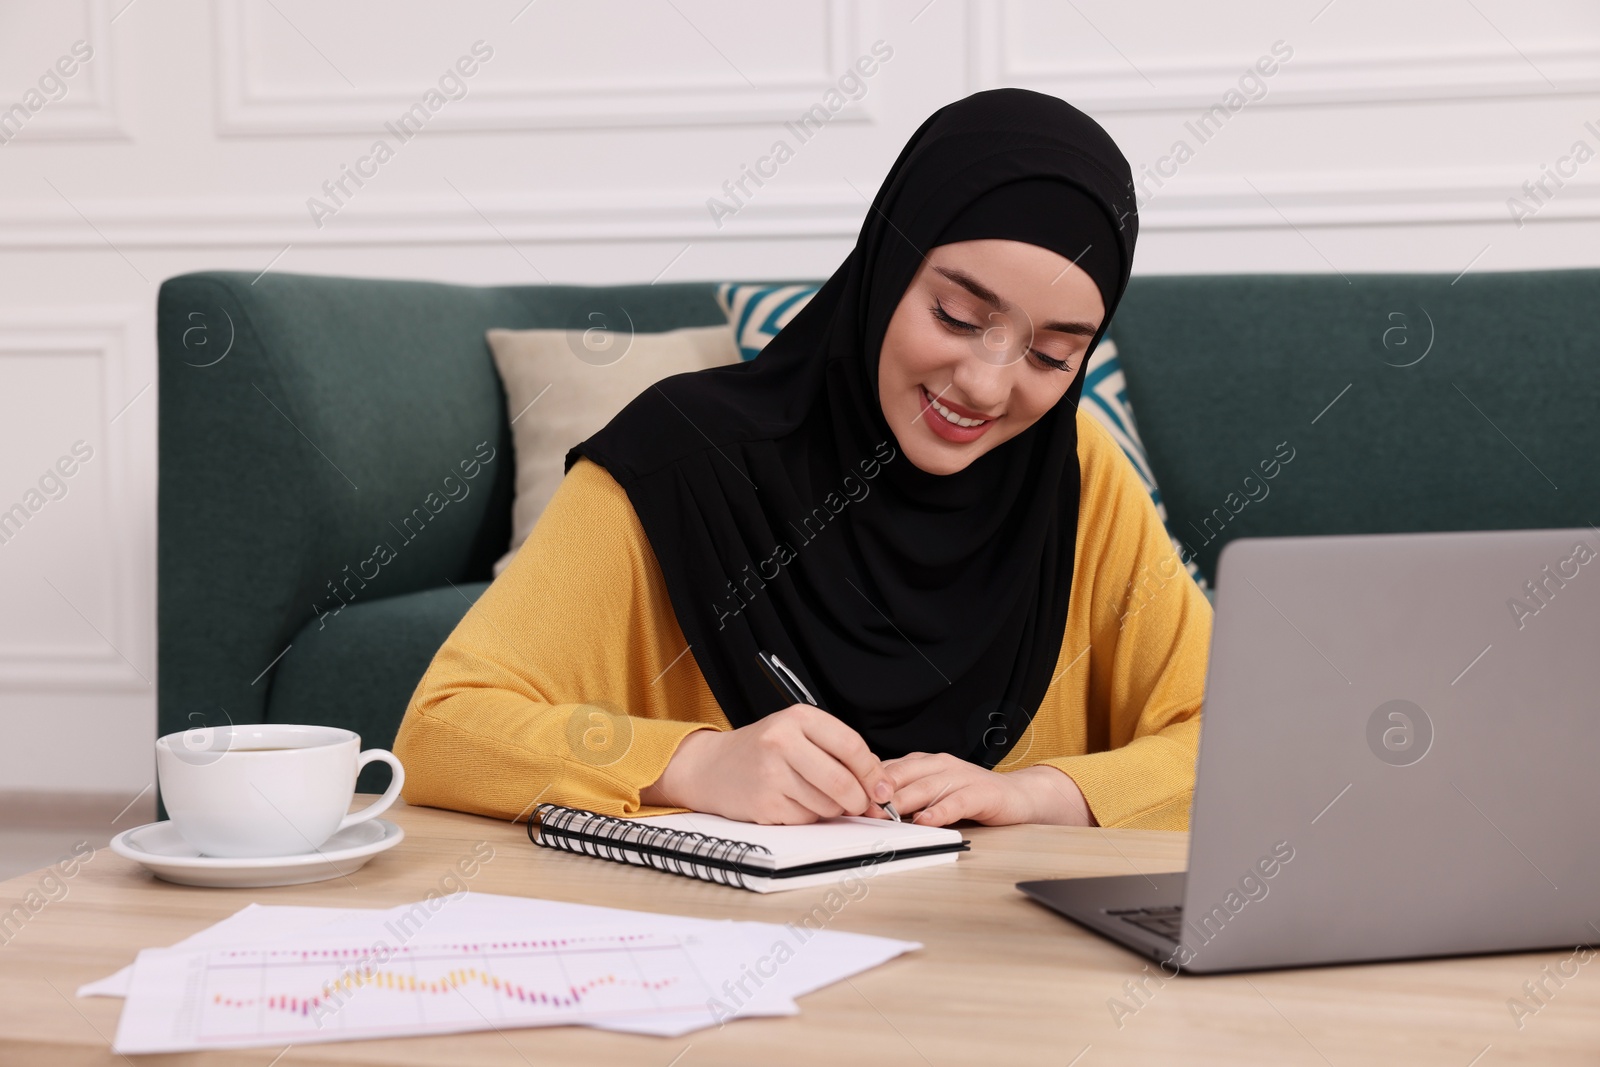 Photo of Muslim woman in hijab writing notes near laptop at wooden table indoors